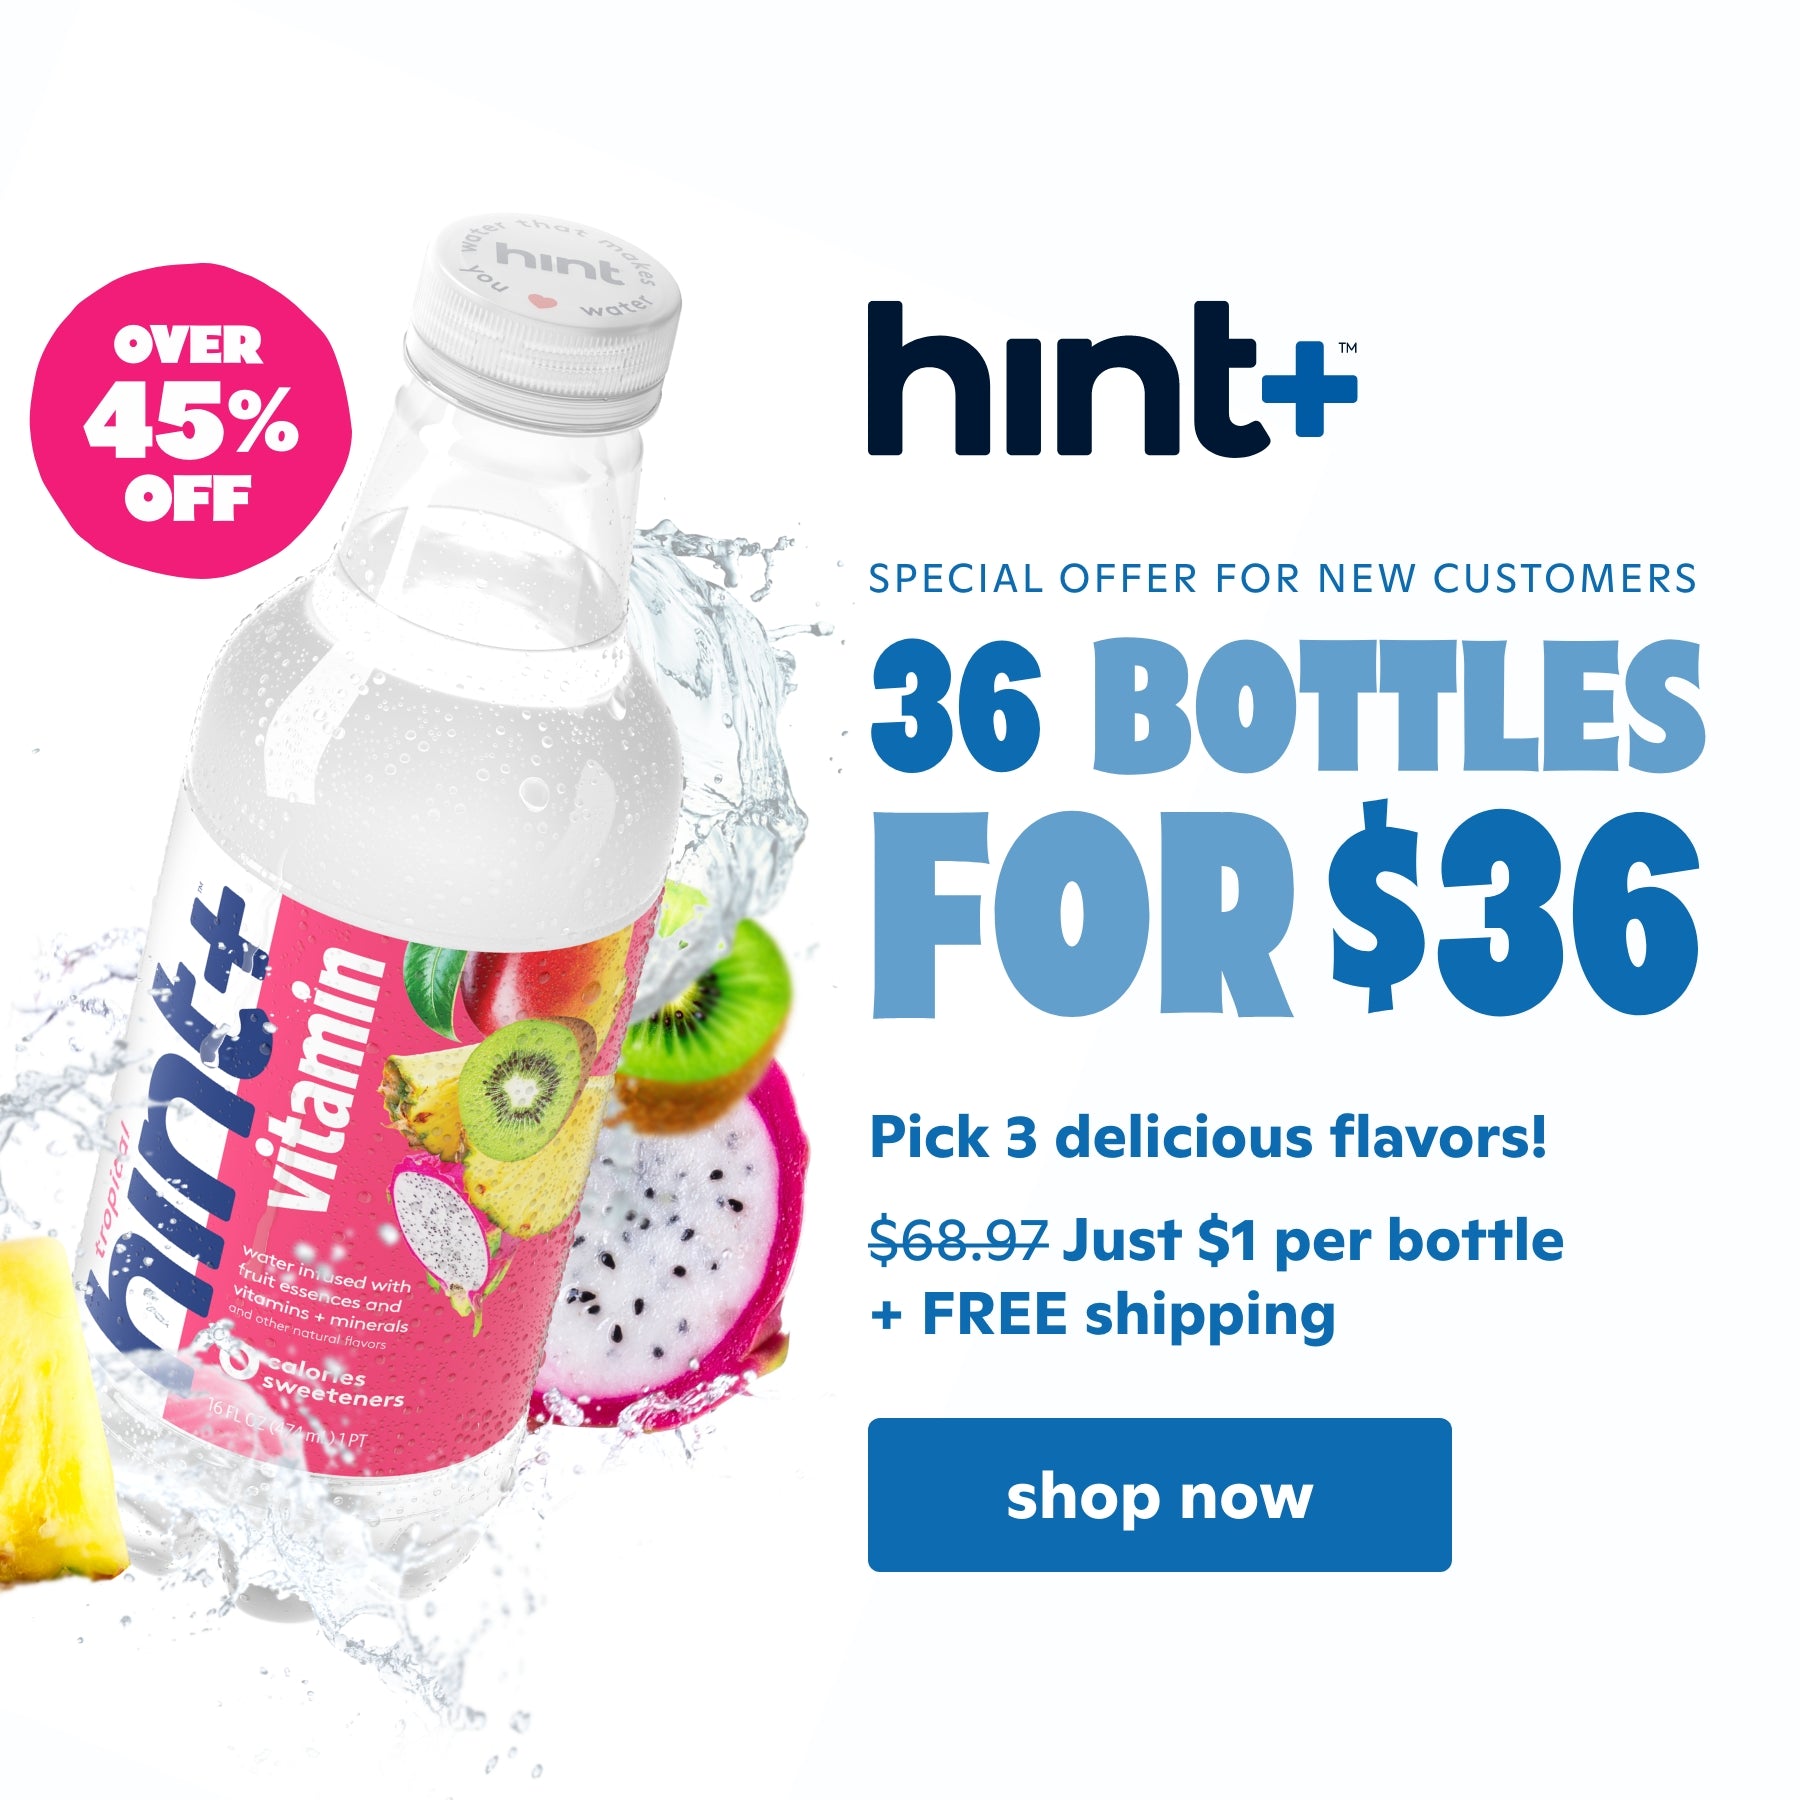 Special new customer offer. 36 bottles of Hint+ vitamin for $36 + FREE shipping. Pick 3 delicious flavors